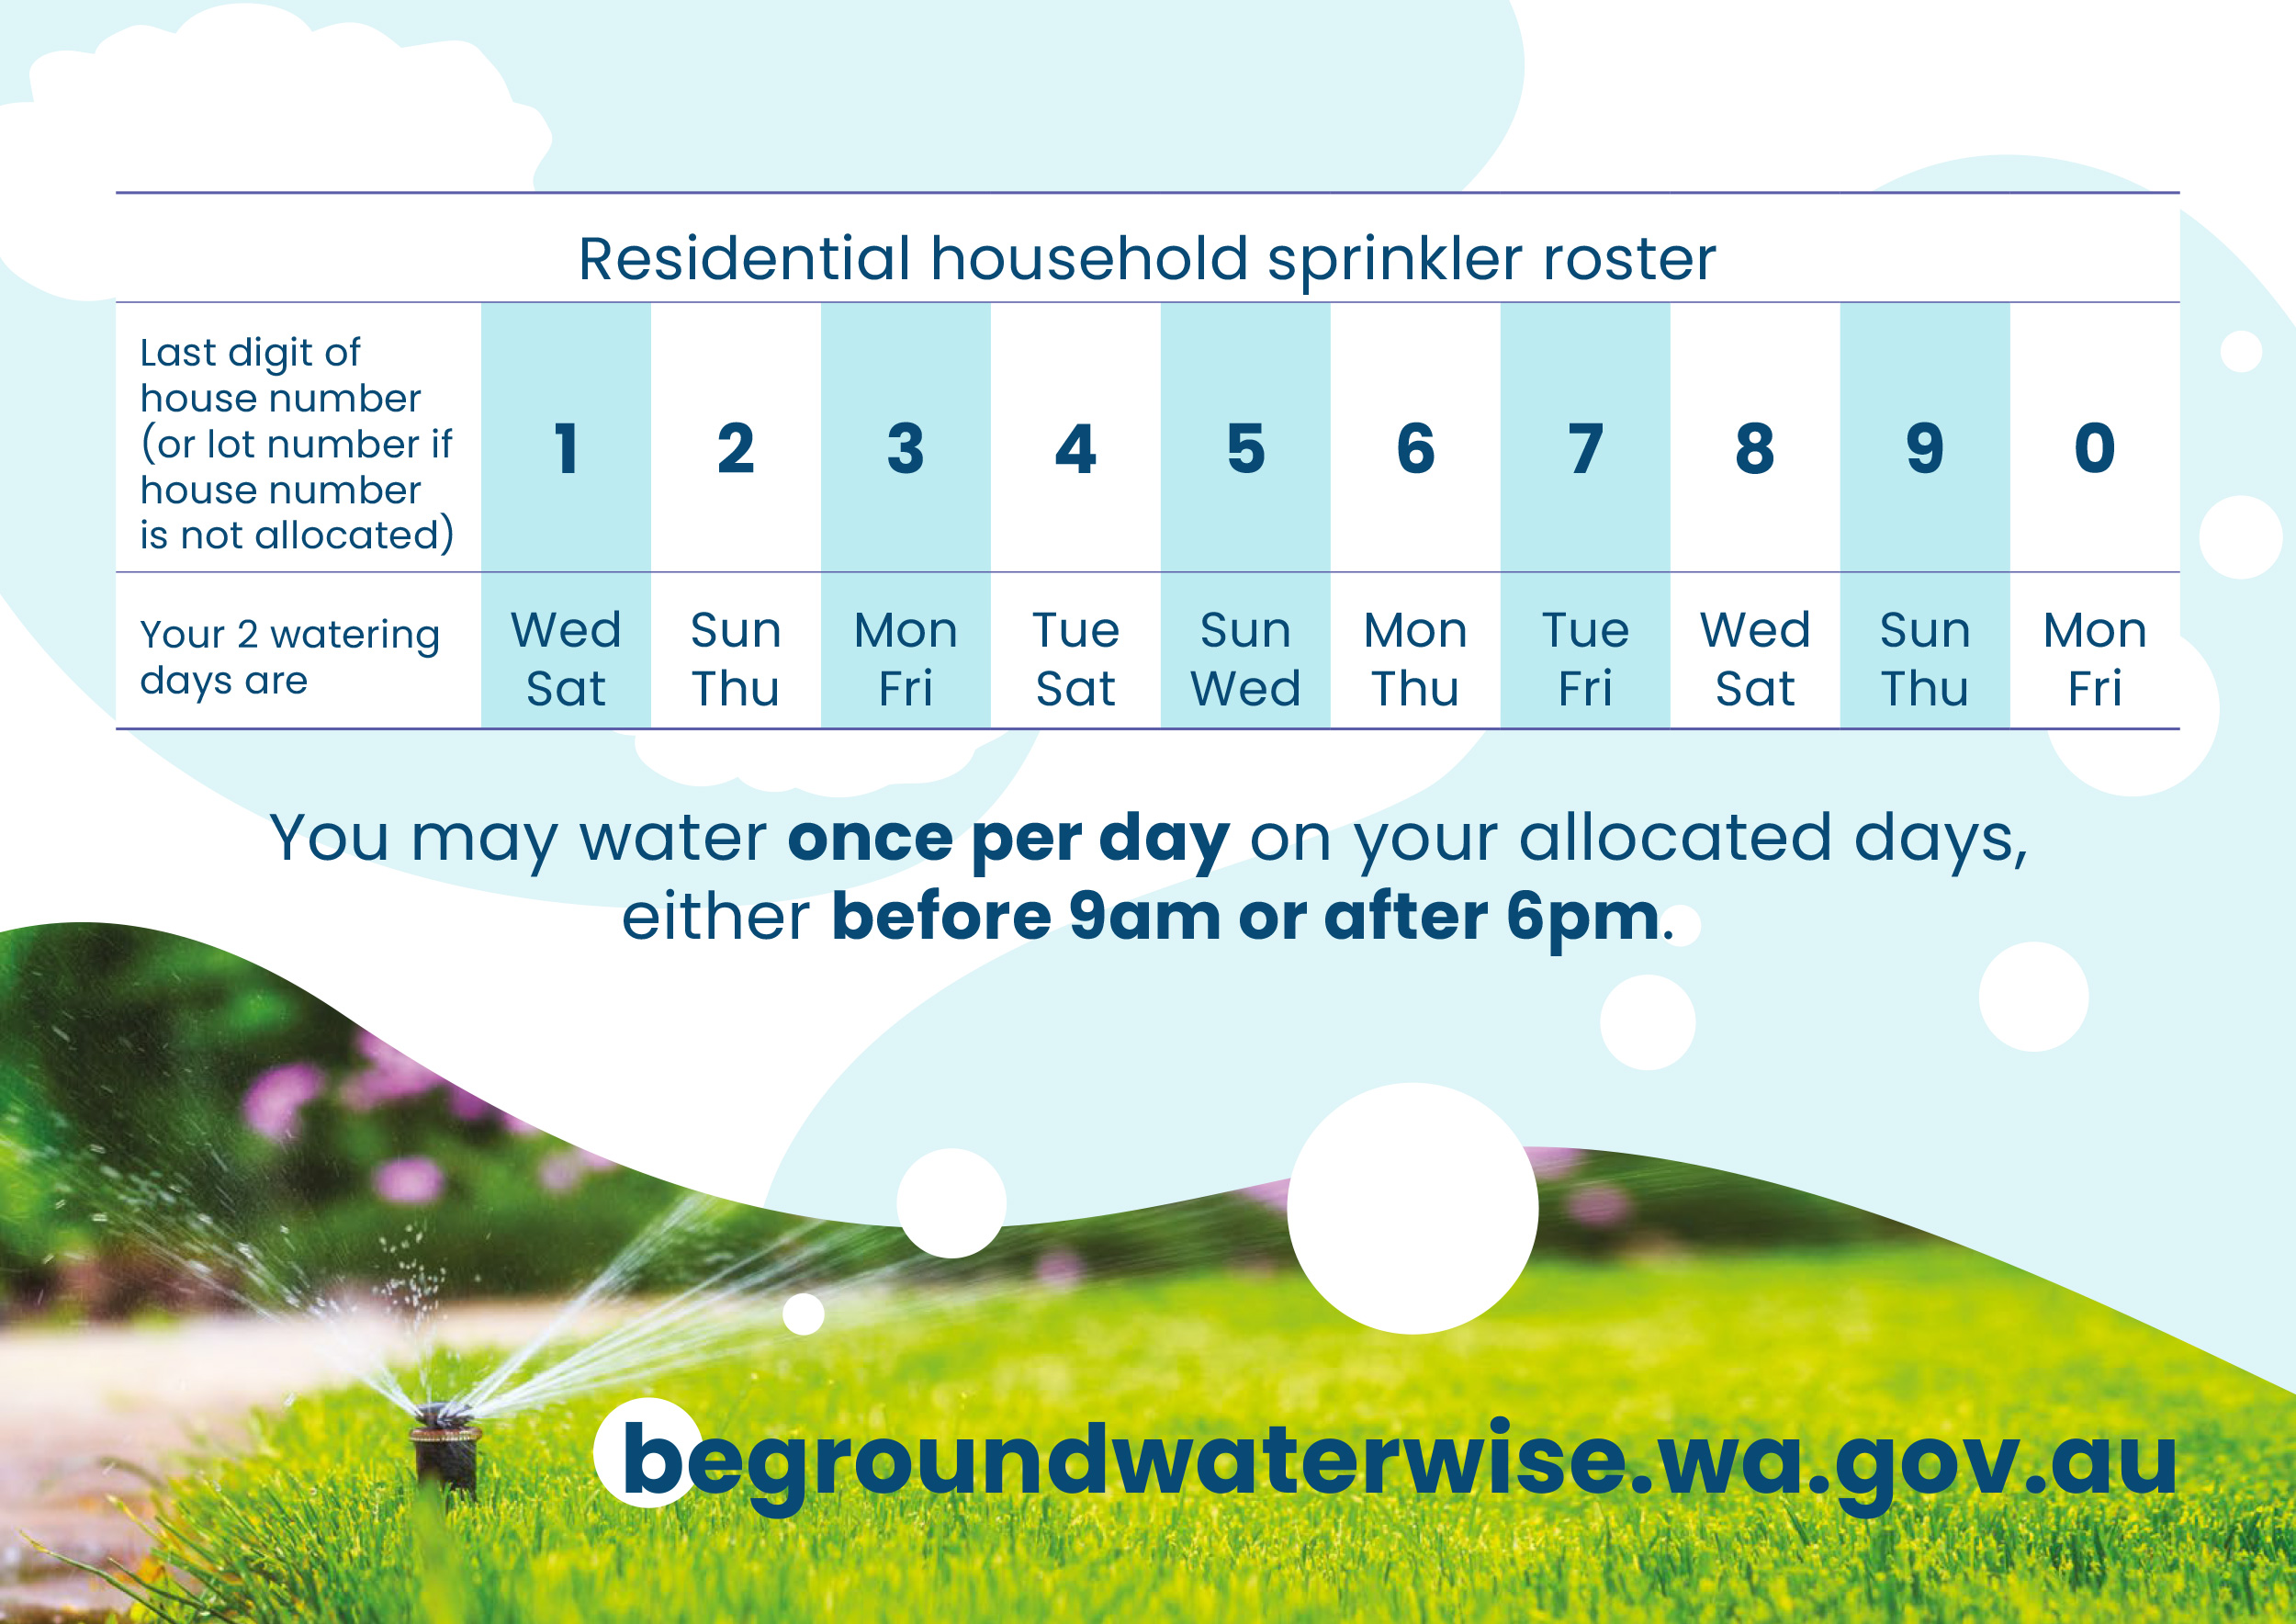 Sprinkler roster Perth and Mandurah - be groundwater wise